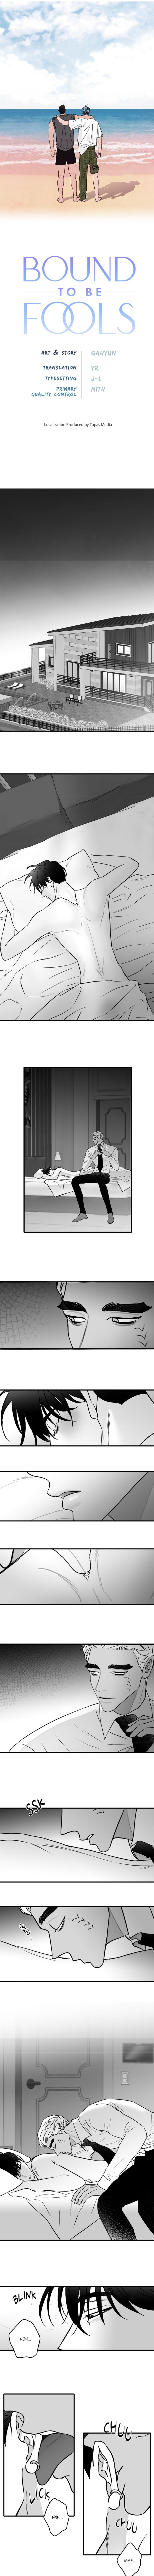 Bound To Be Fools - Page 3